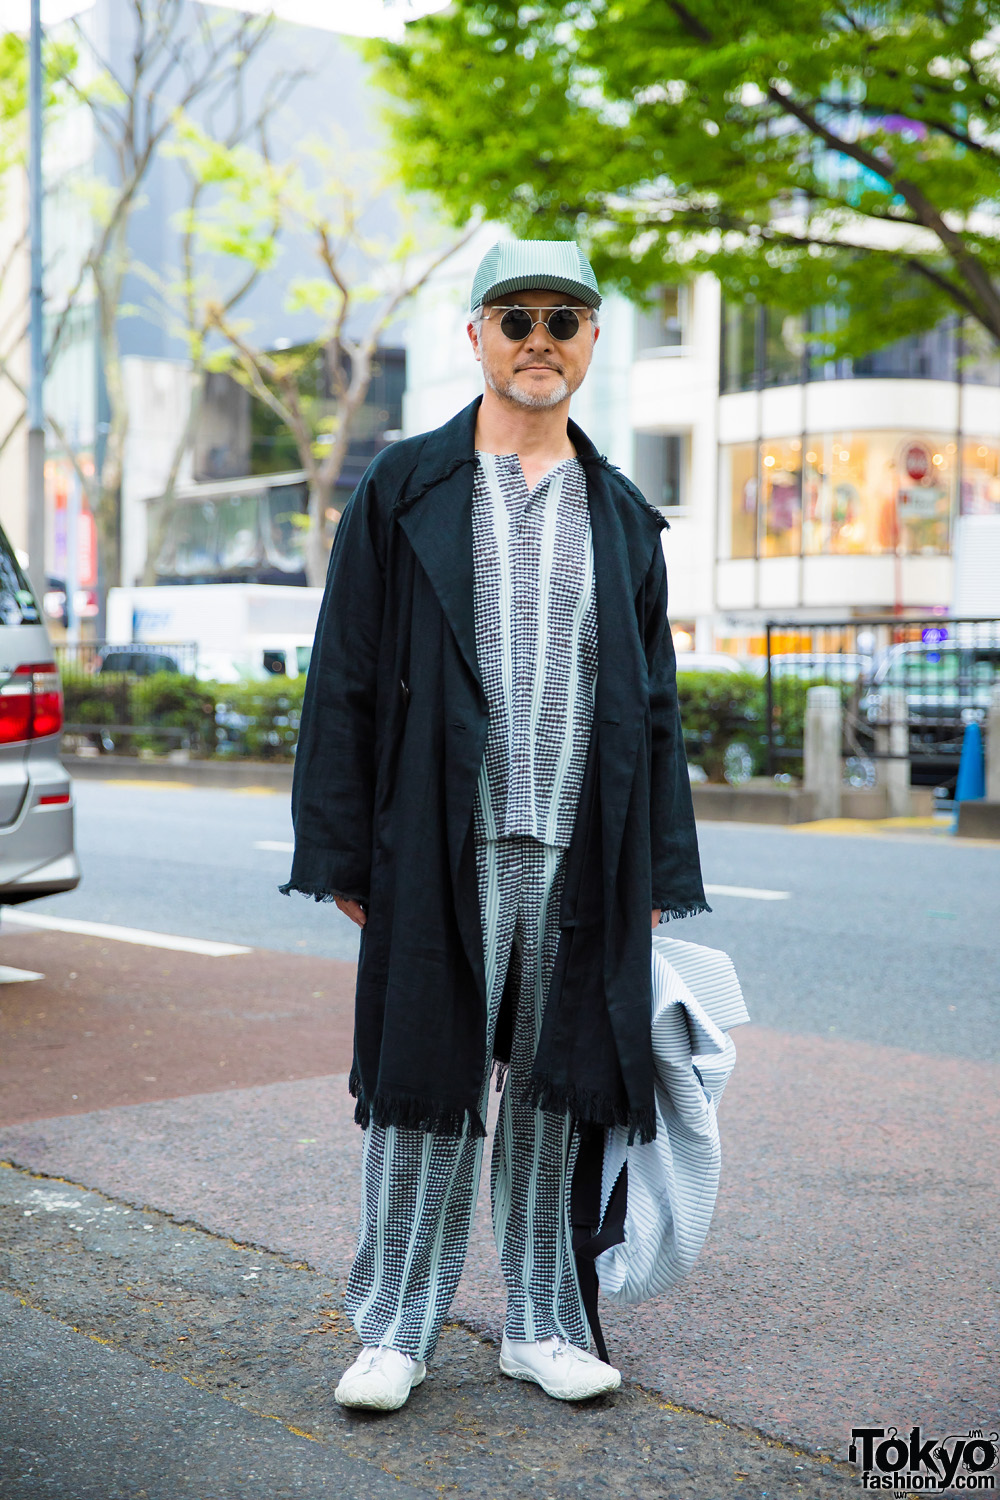 Micro-Pleat Monochrome Street Style w/ Fringed Coat, White Sneakers, Backpack & Pleated Cap